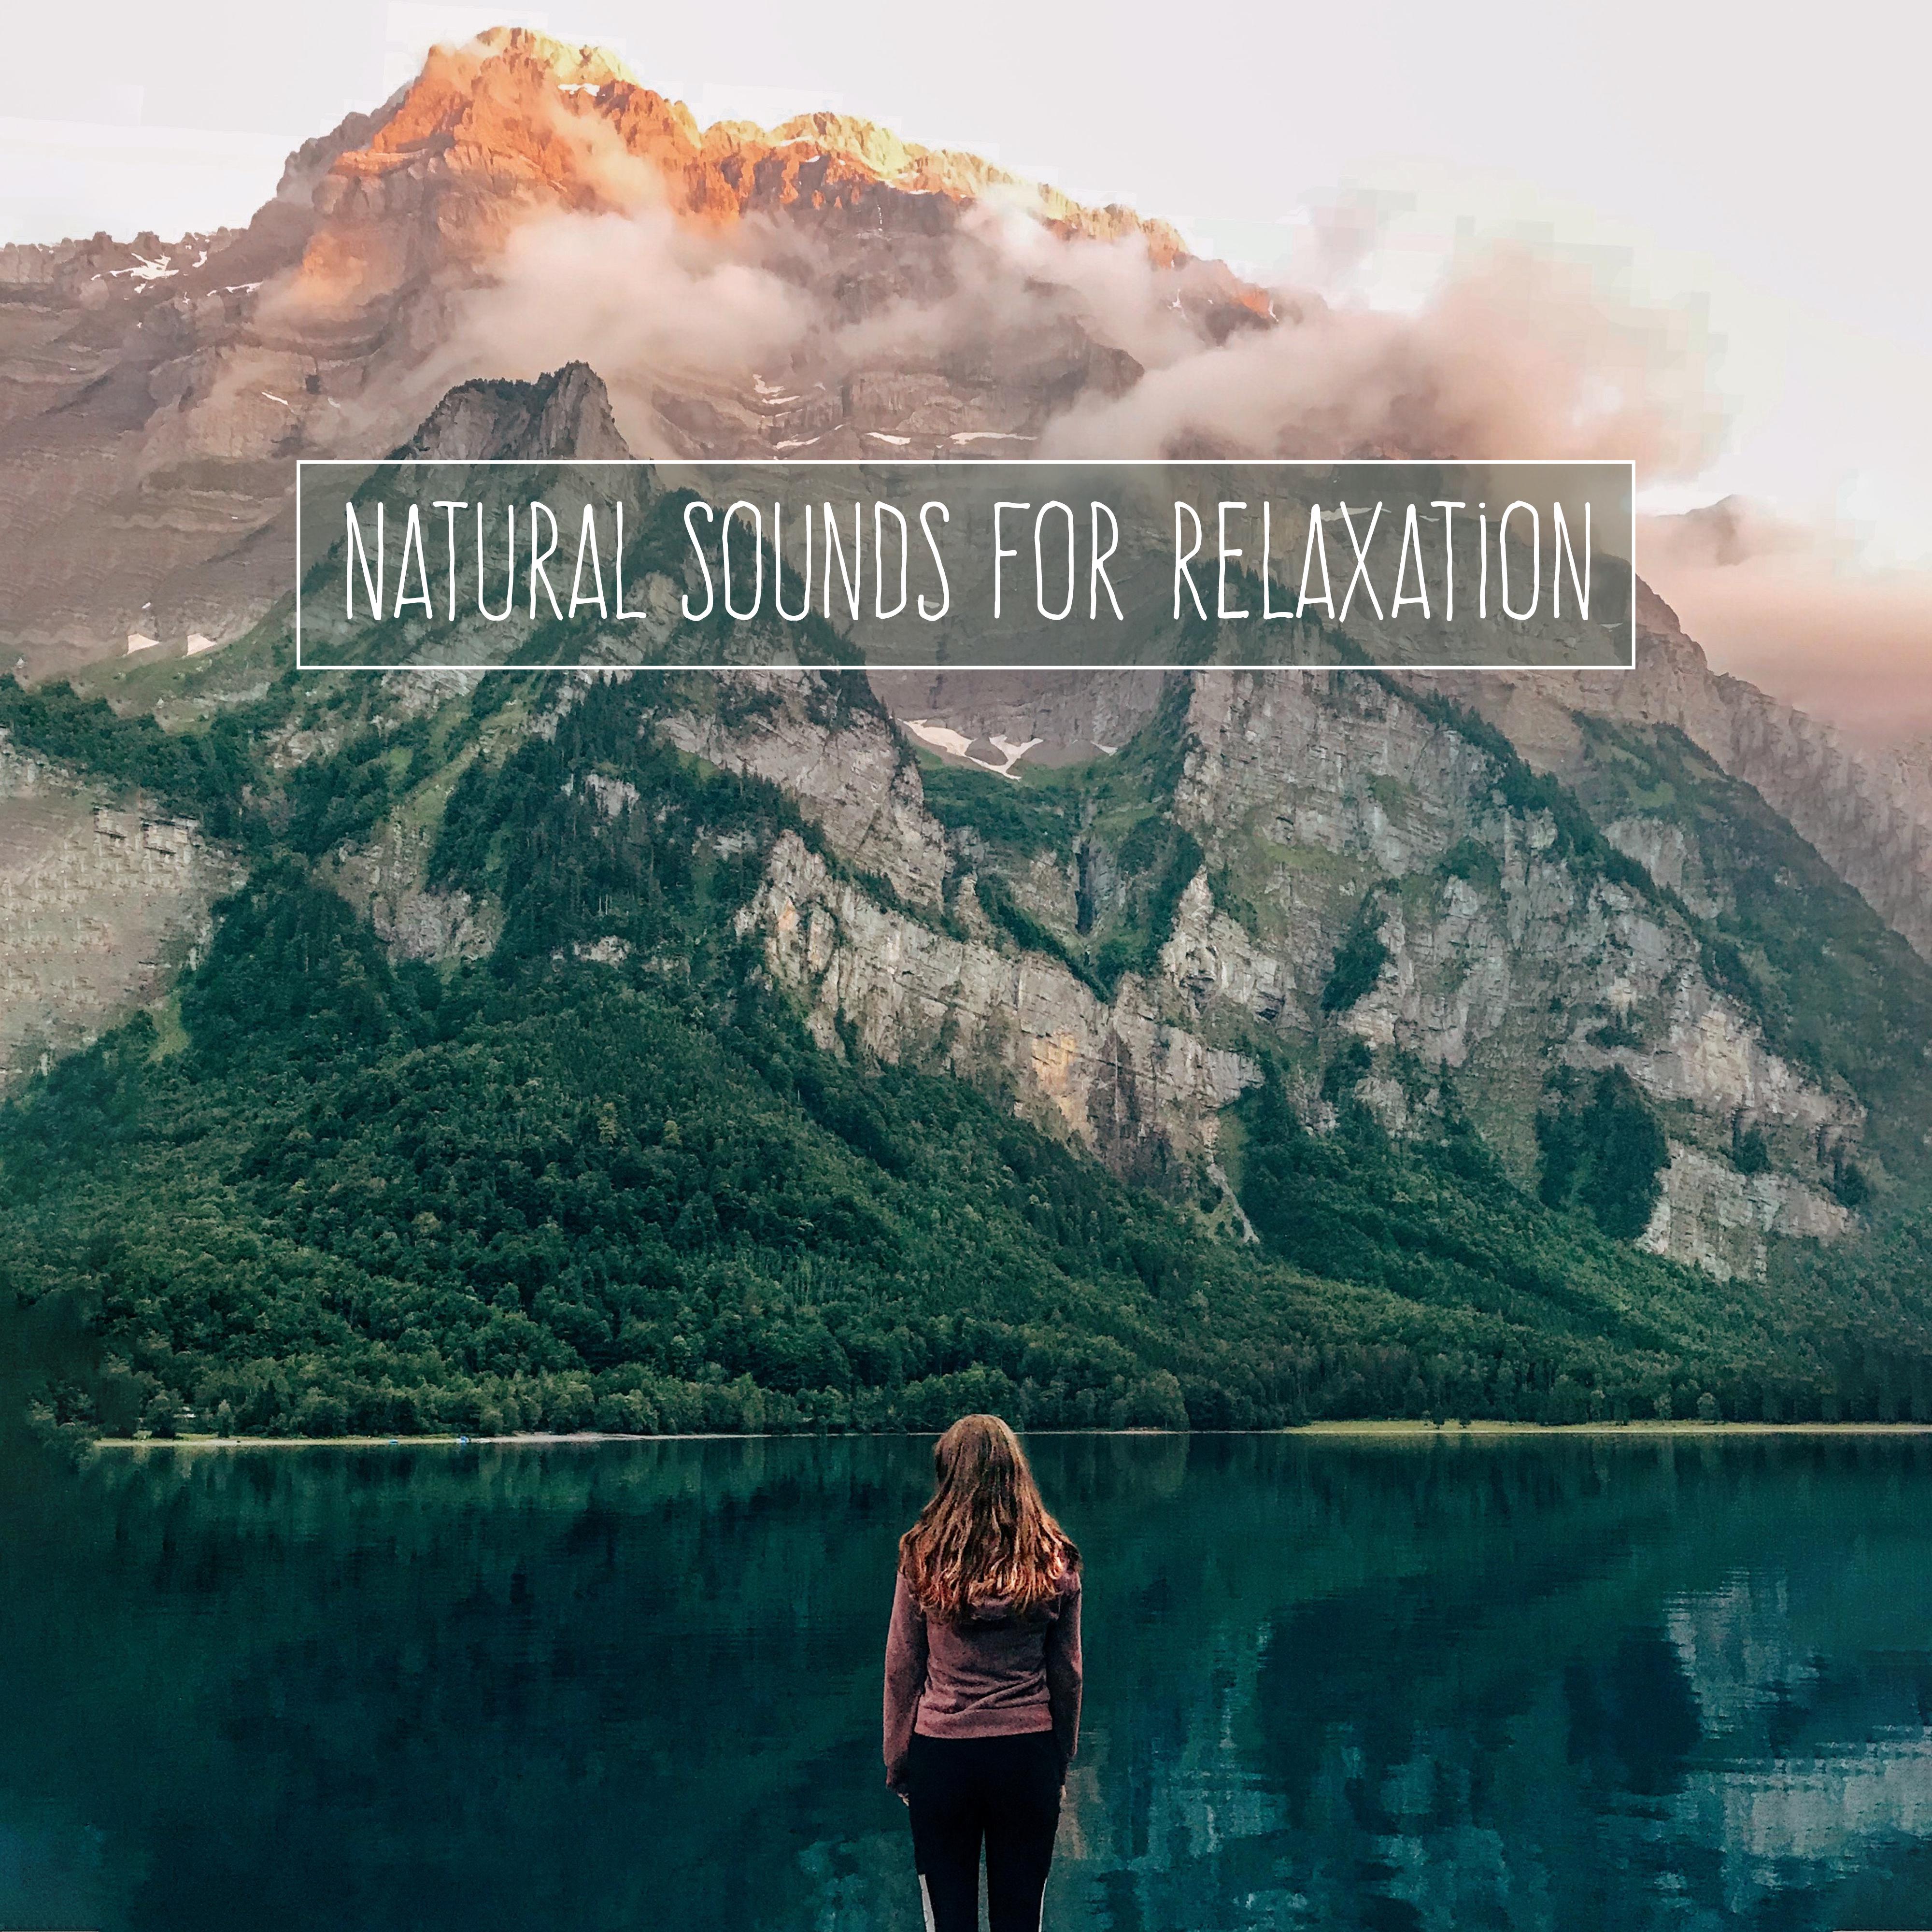 Natural Sounds for Relaxation: 2019 New Age Nature & Ambient Music Selection for Pure Relaxation, Calm Down, Stress Free, Fully Restore Your Vital Energy